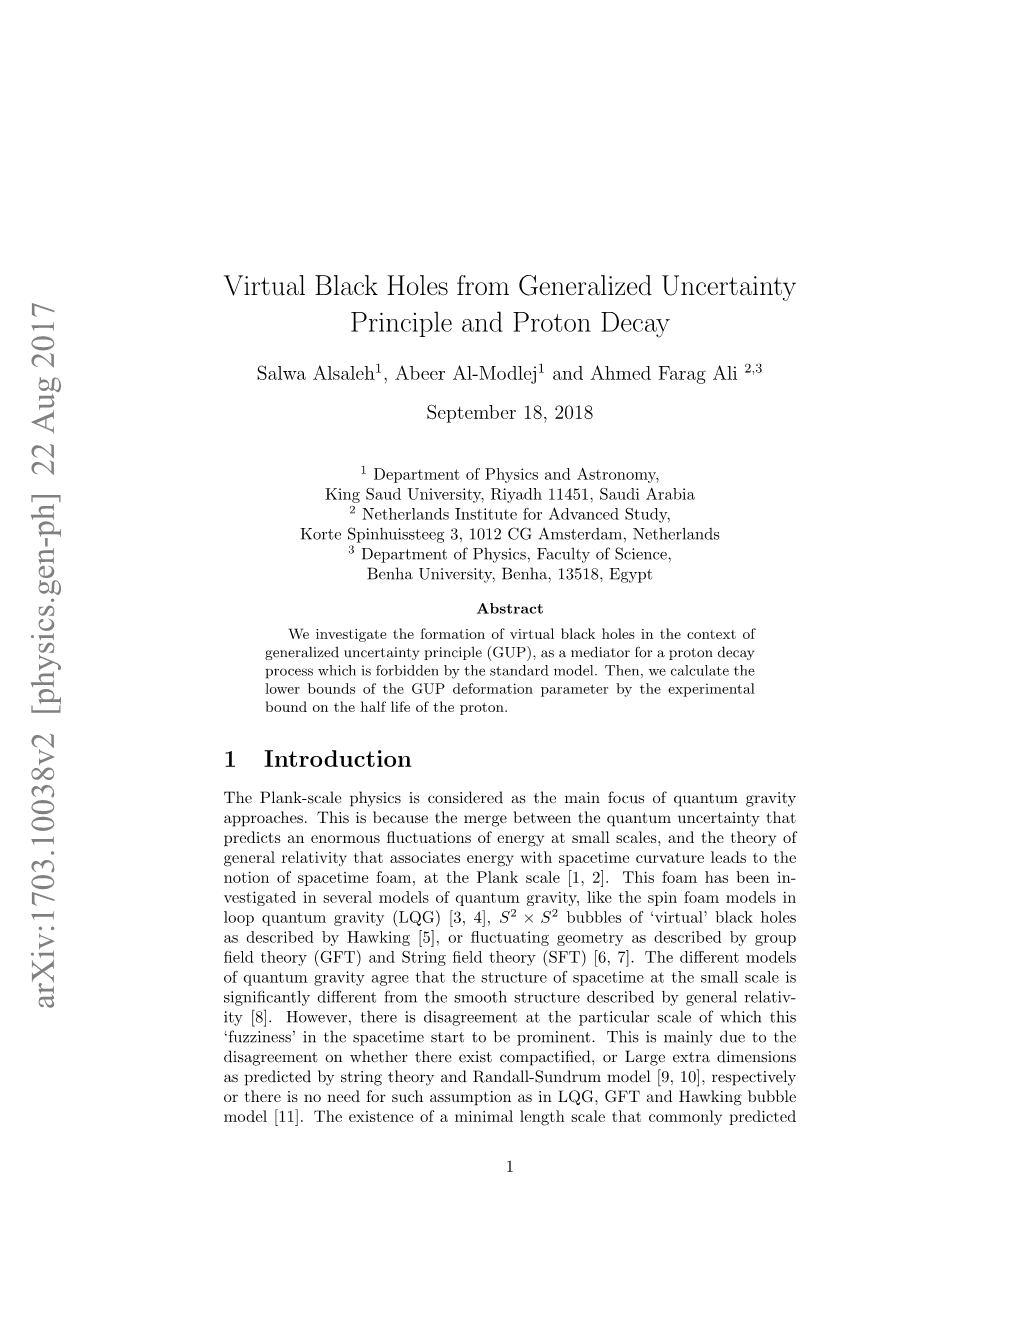 Virtual Black Holes from Generalized Uncertainty Principle and Proton Decay